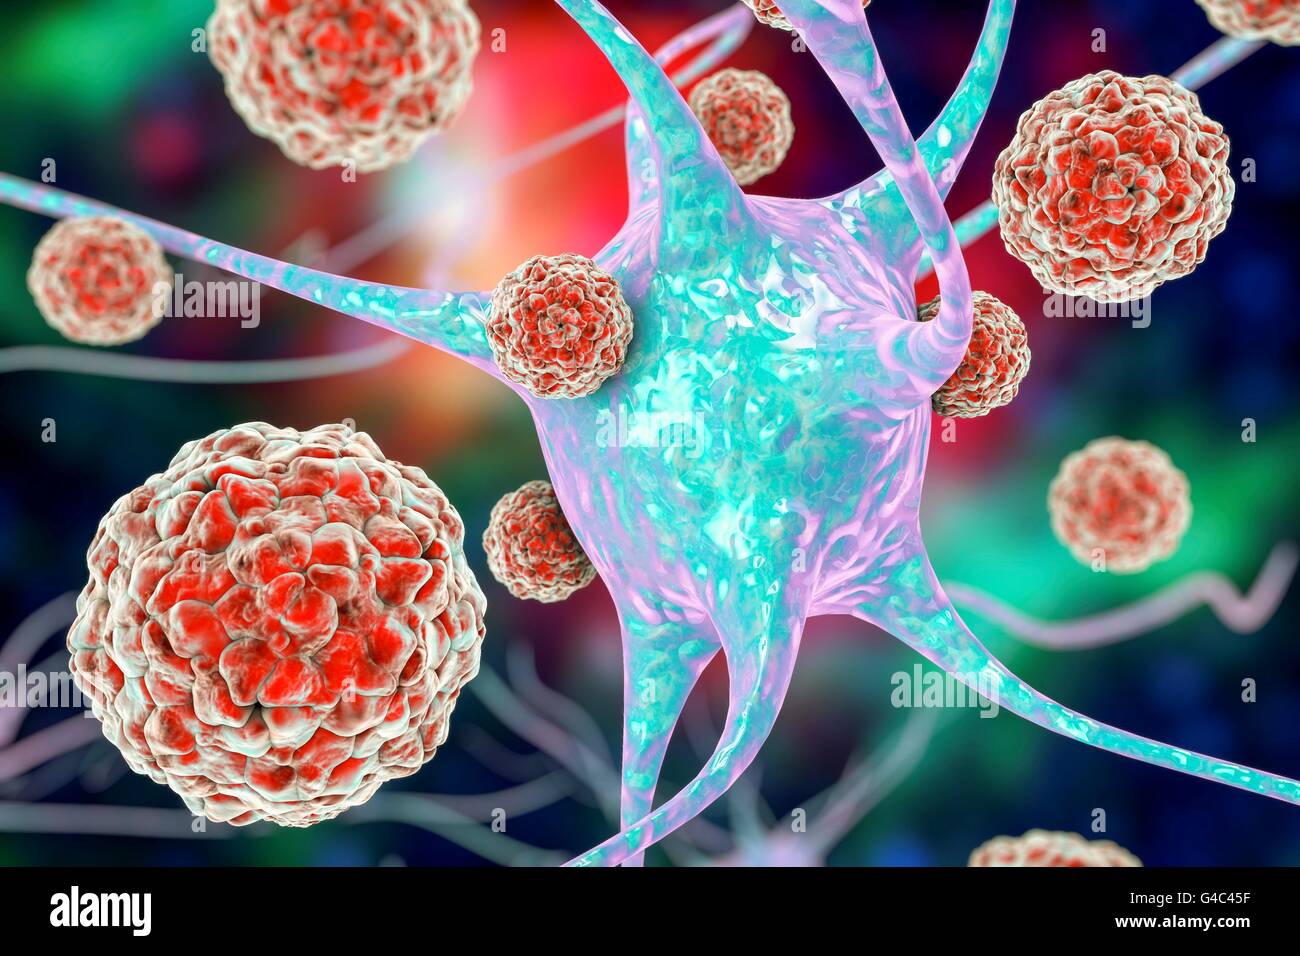 Enteroviruses affecting neuron, computer illustration. Enteroviruses are RNA (ribonucleic acid) viruses from the Picornaviridae family. They cause infections of different locations, including infections of the central nervous system. Stock Photo